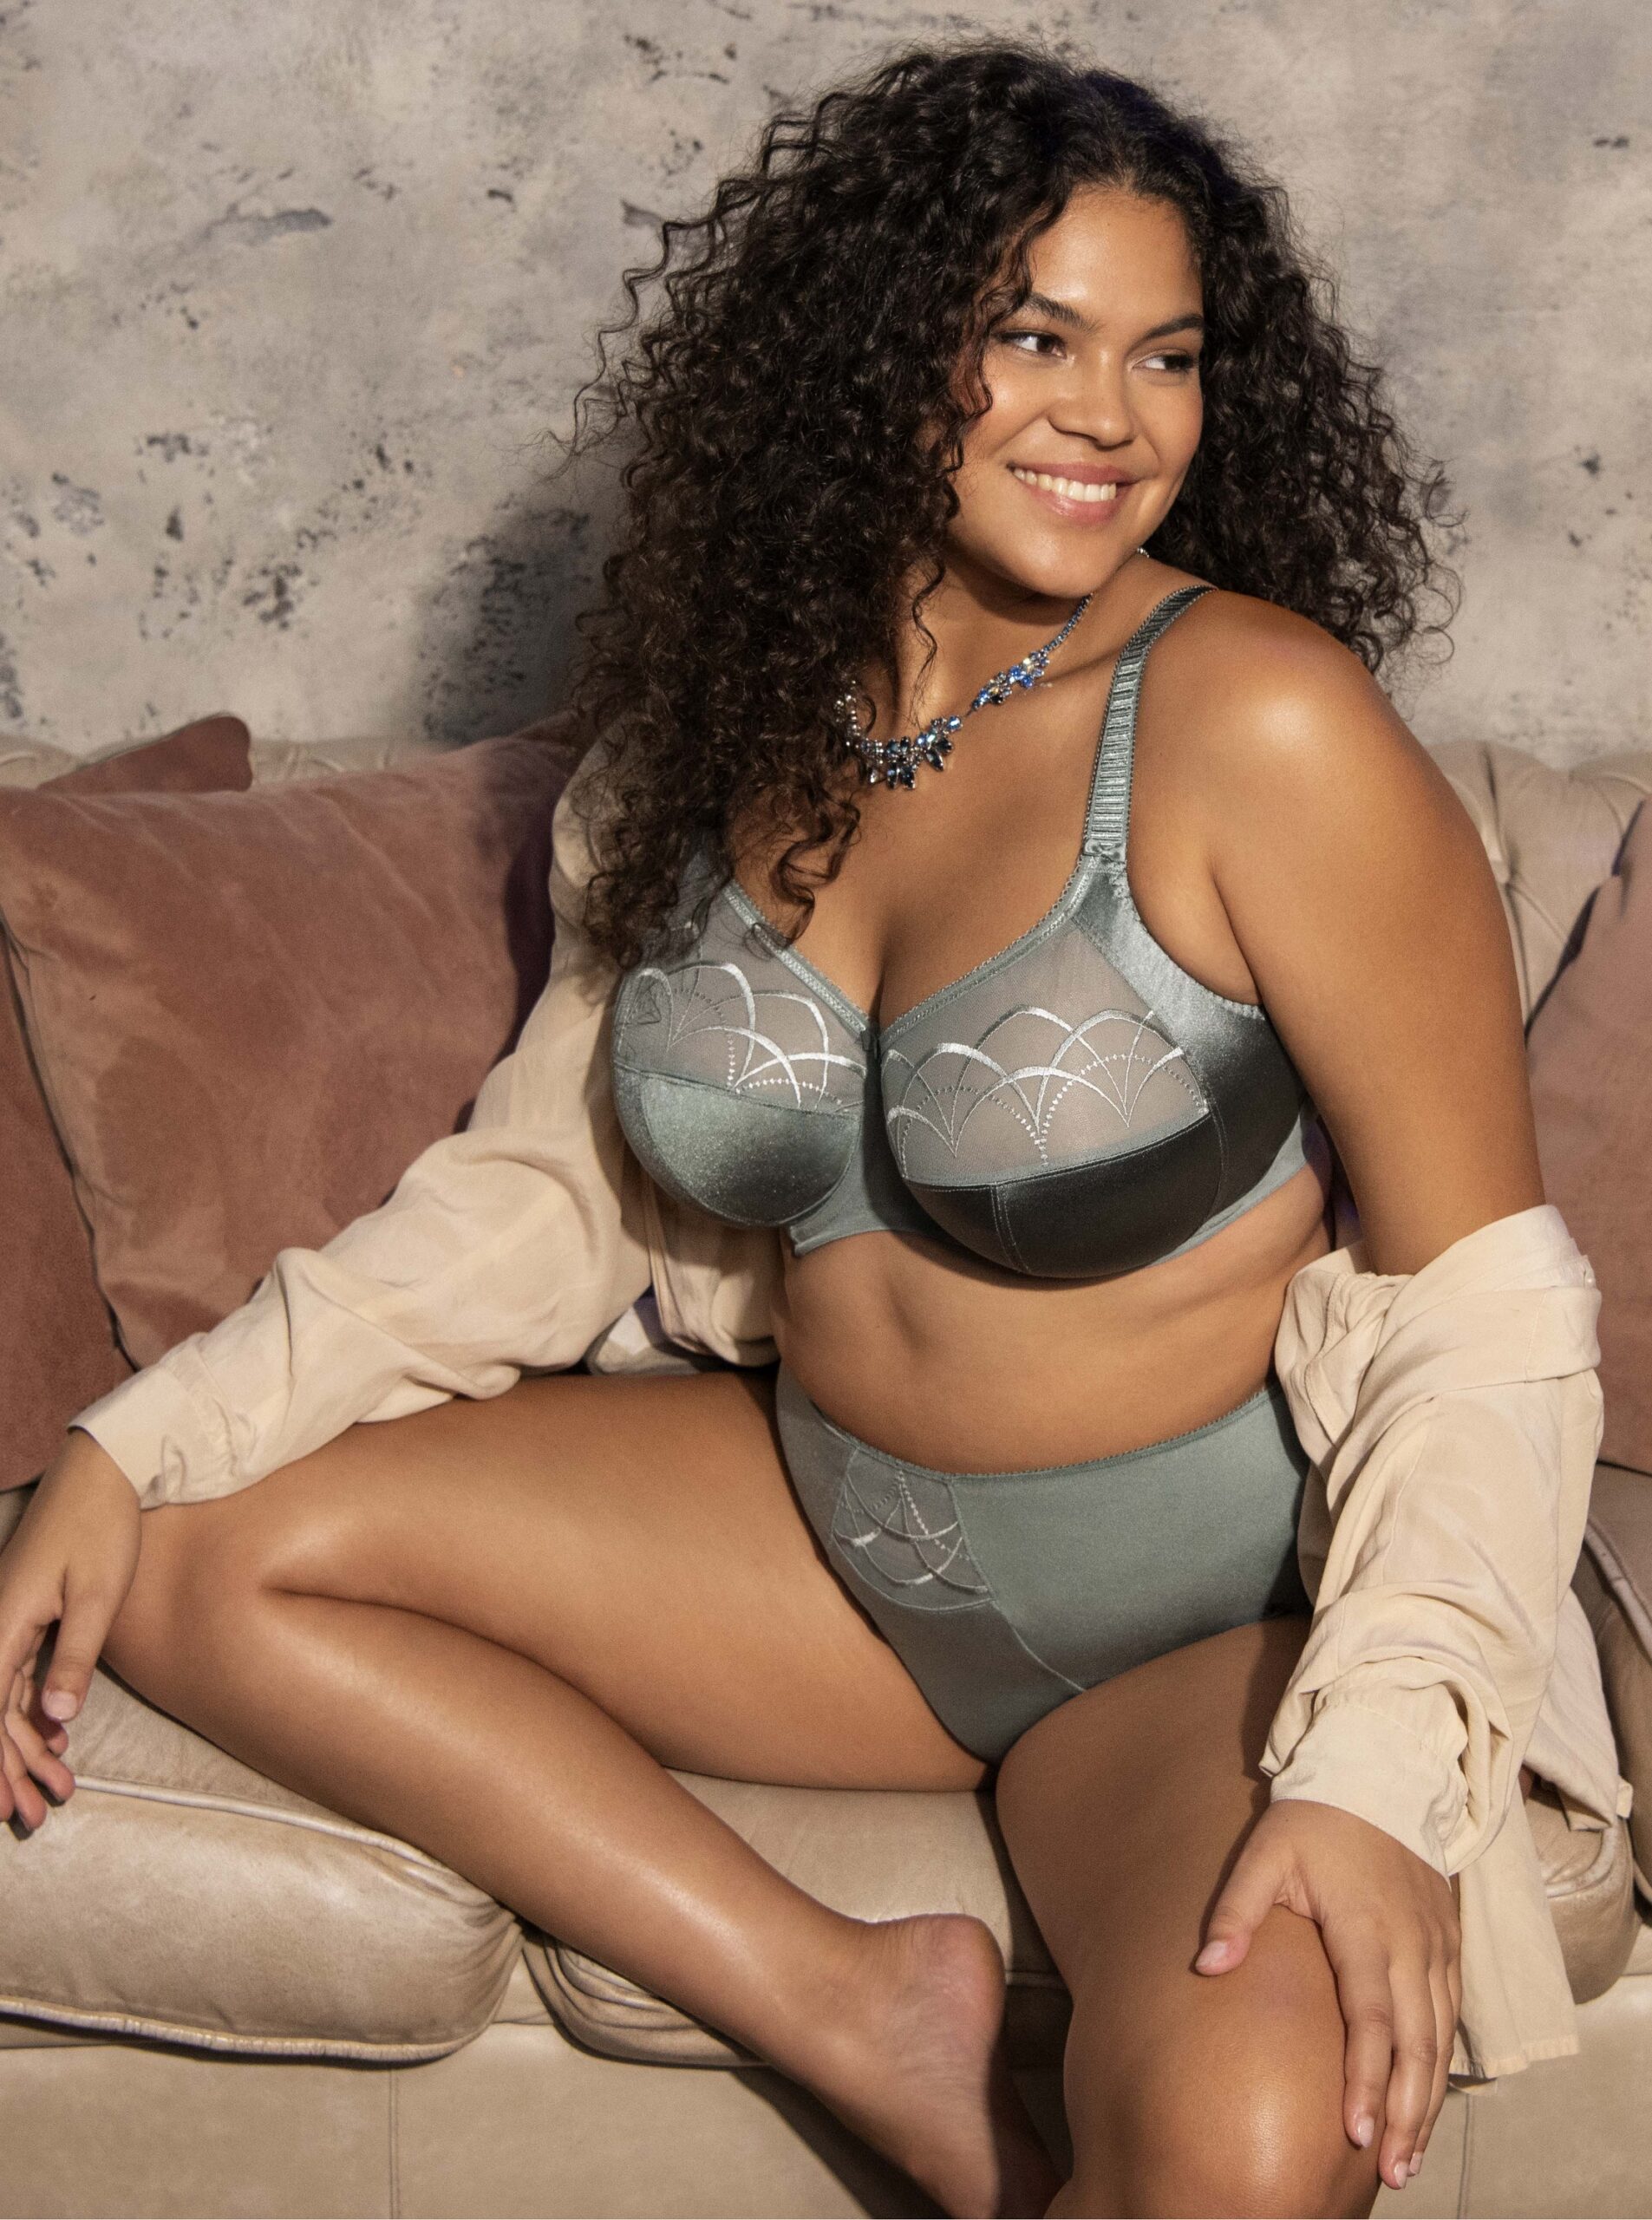 Elomi Cate Full Cup Banded Underwire Bra EL4030 - Willow